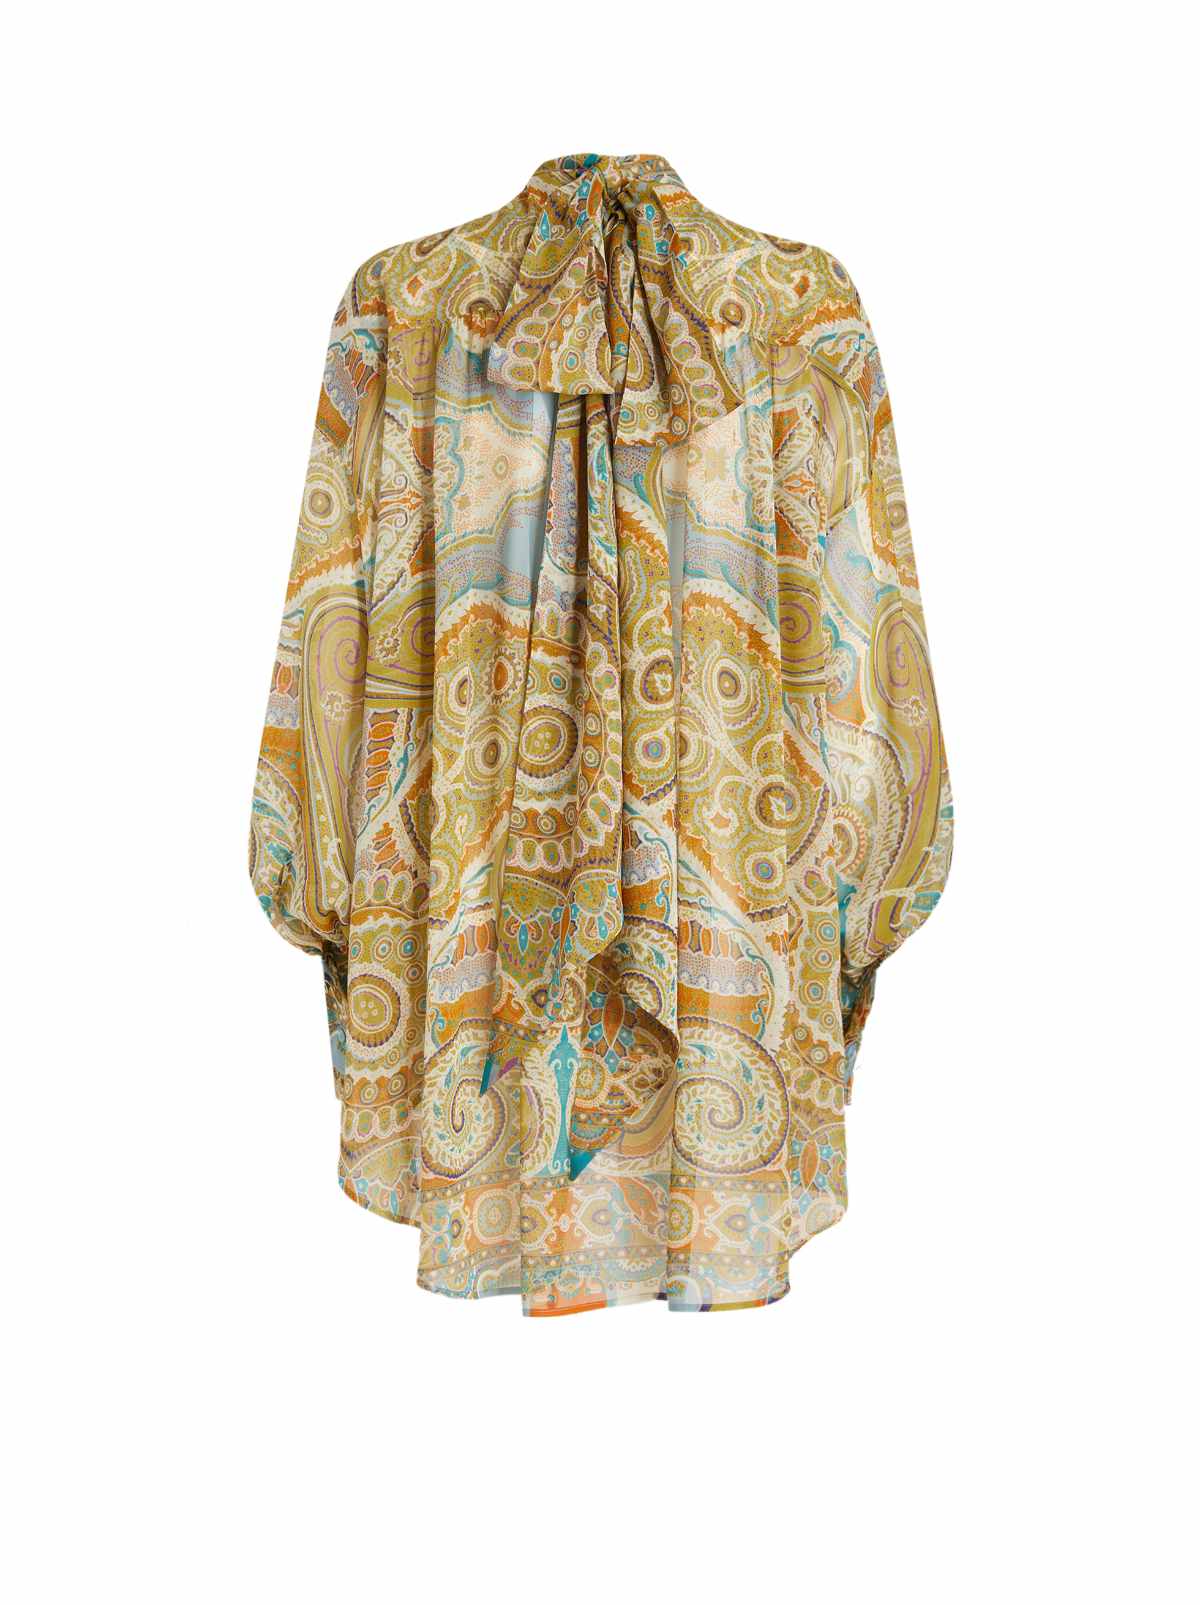 Etro Launched A Limited Capsule Collection In Collaboration With Harris Reed